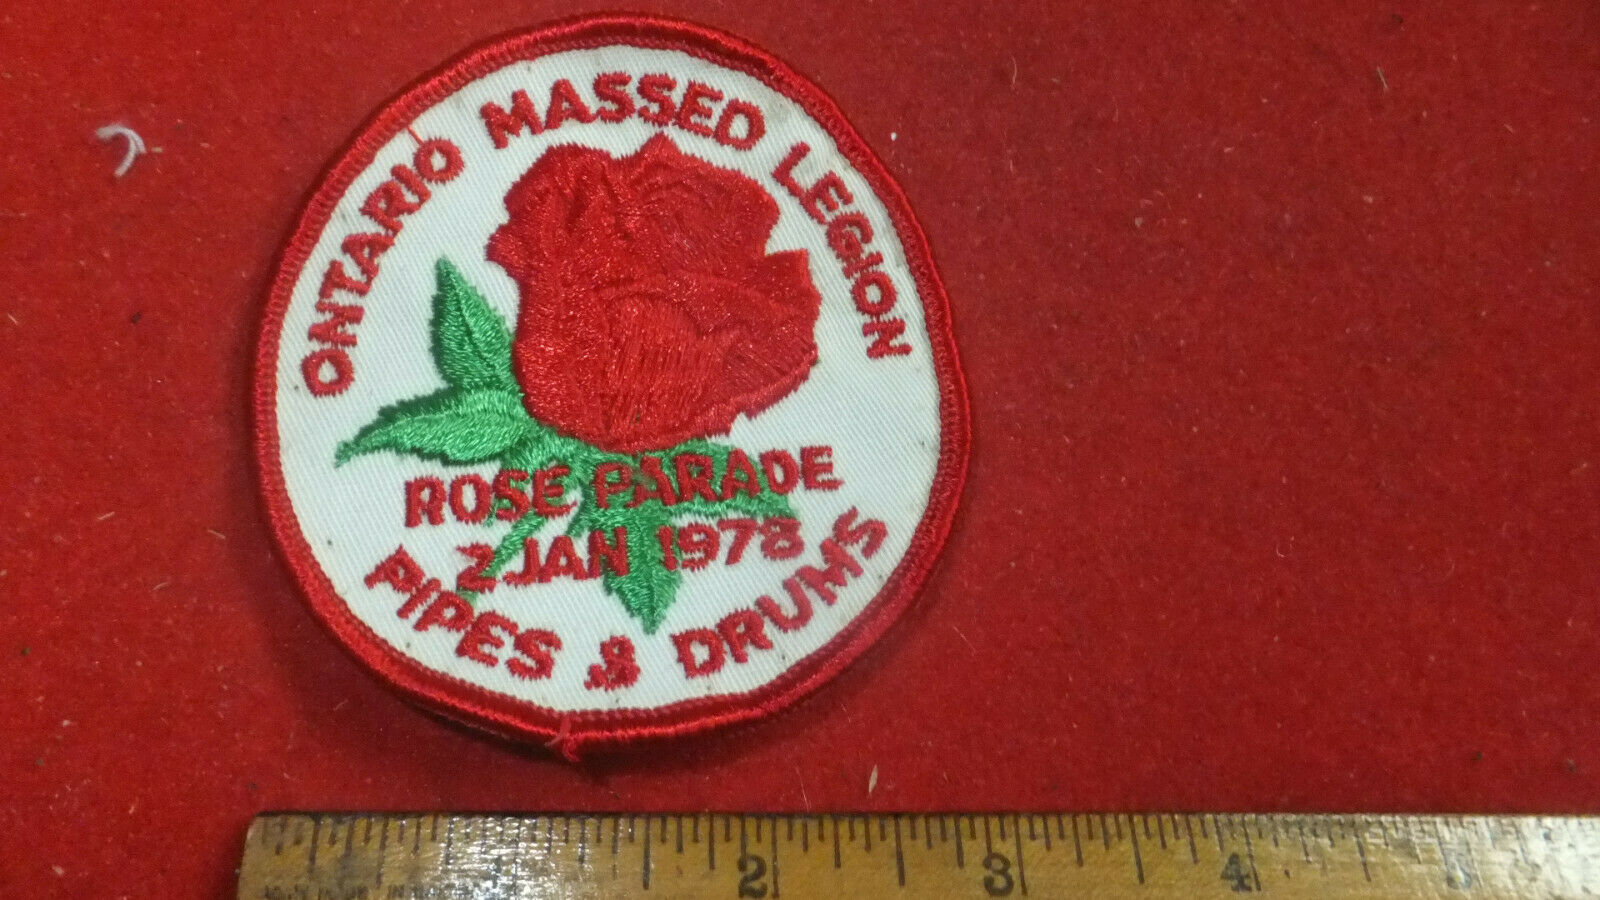 Patch -  Band / Music - Ontario Massed Legion Pipes & Drums - Rose Parade 1978